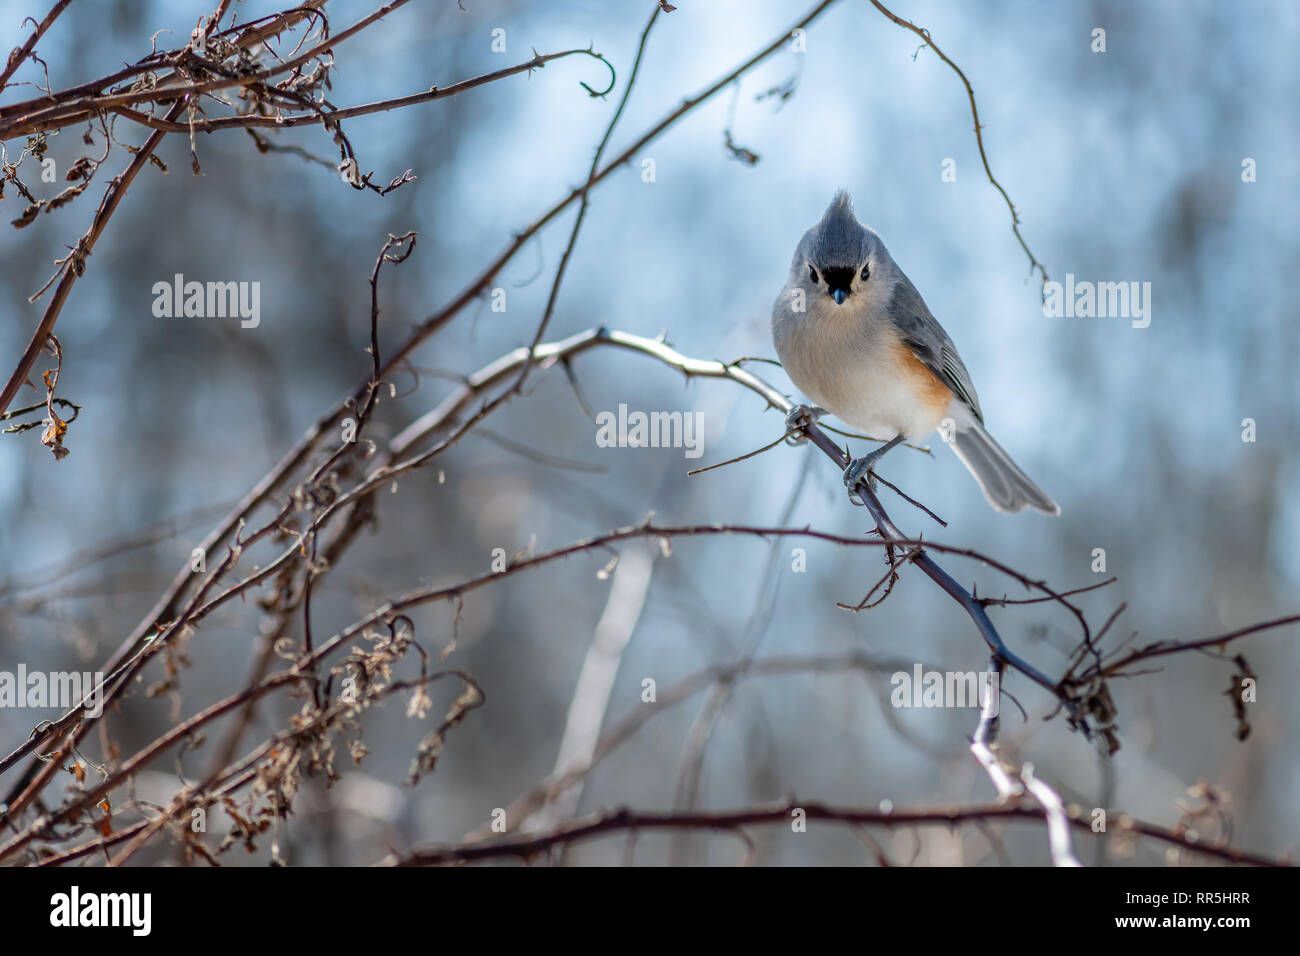 Tufted titmouse (Baeolophus bicolor) perching on a branch in winter. Stock Photo